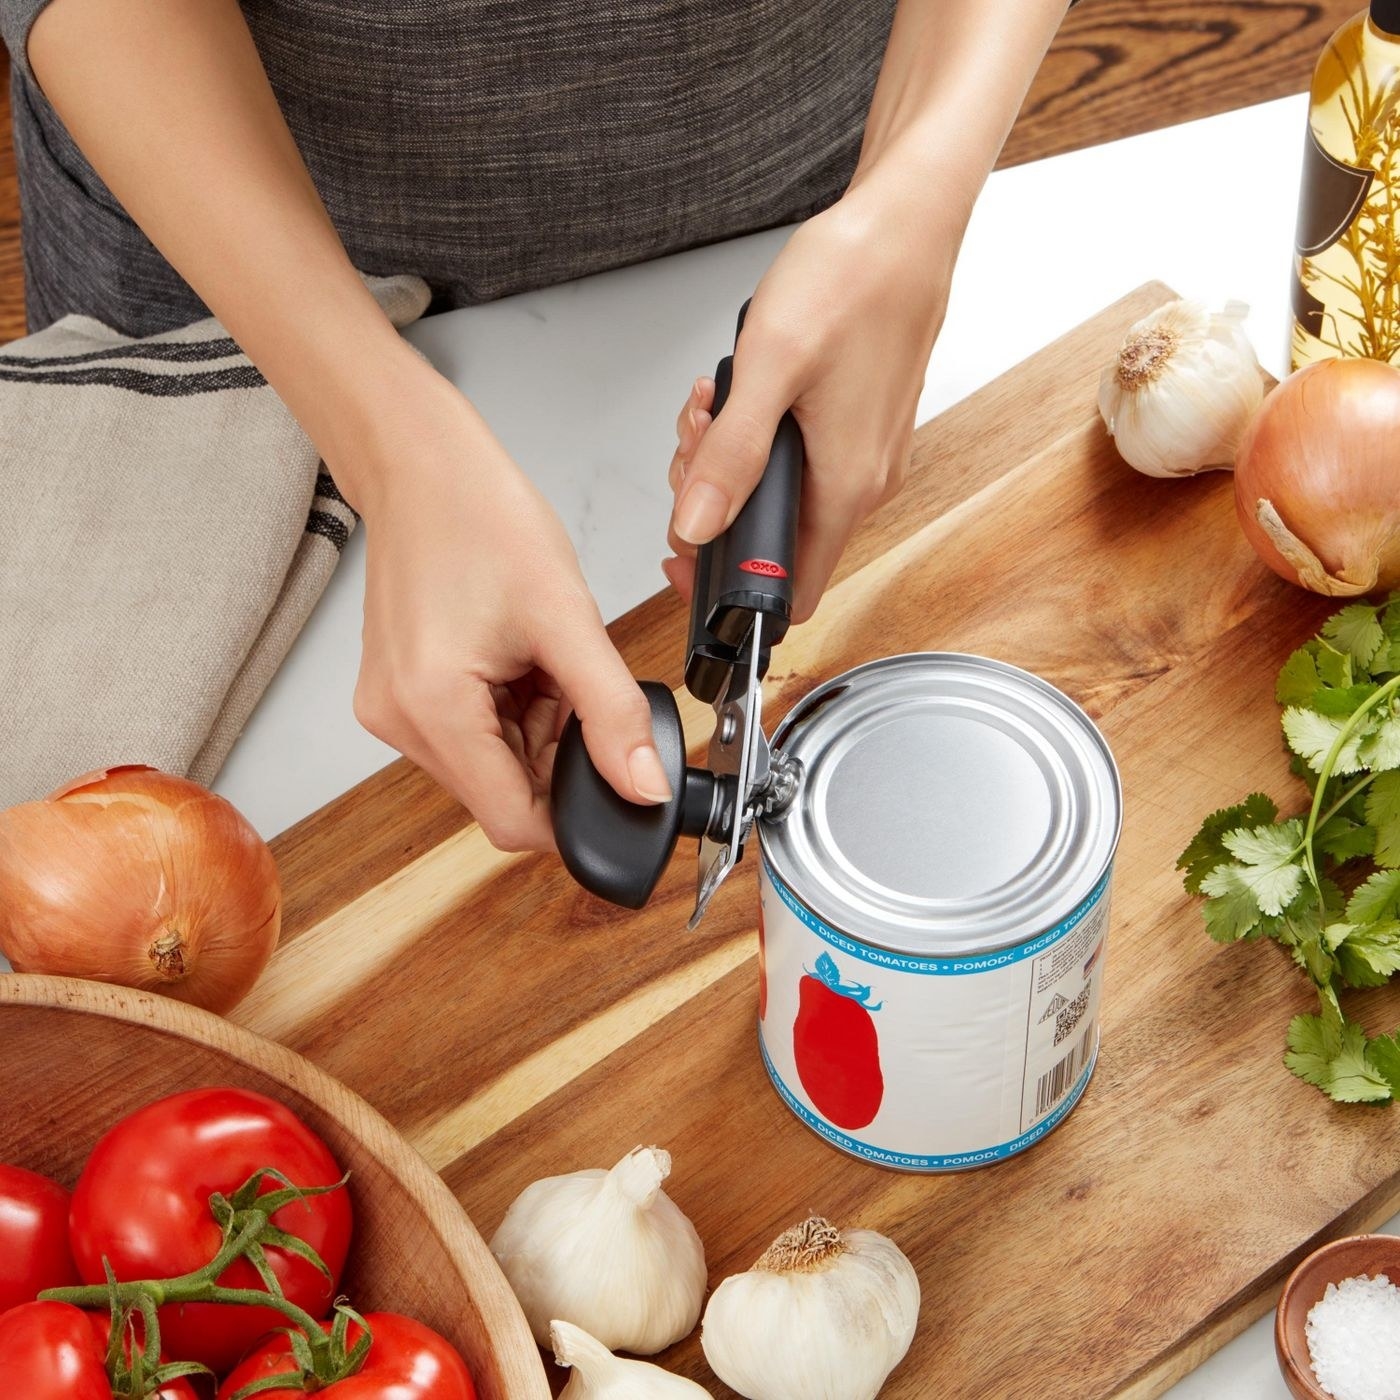 Model using can opener on tomato can surrounded by onions, garlic, tomatoes and herbs